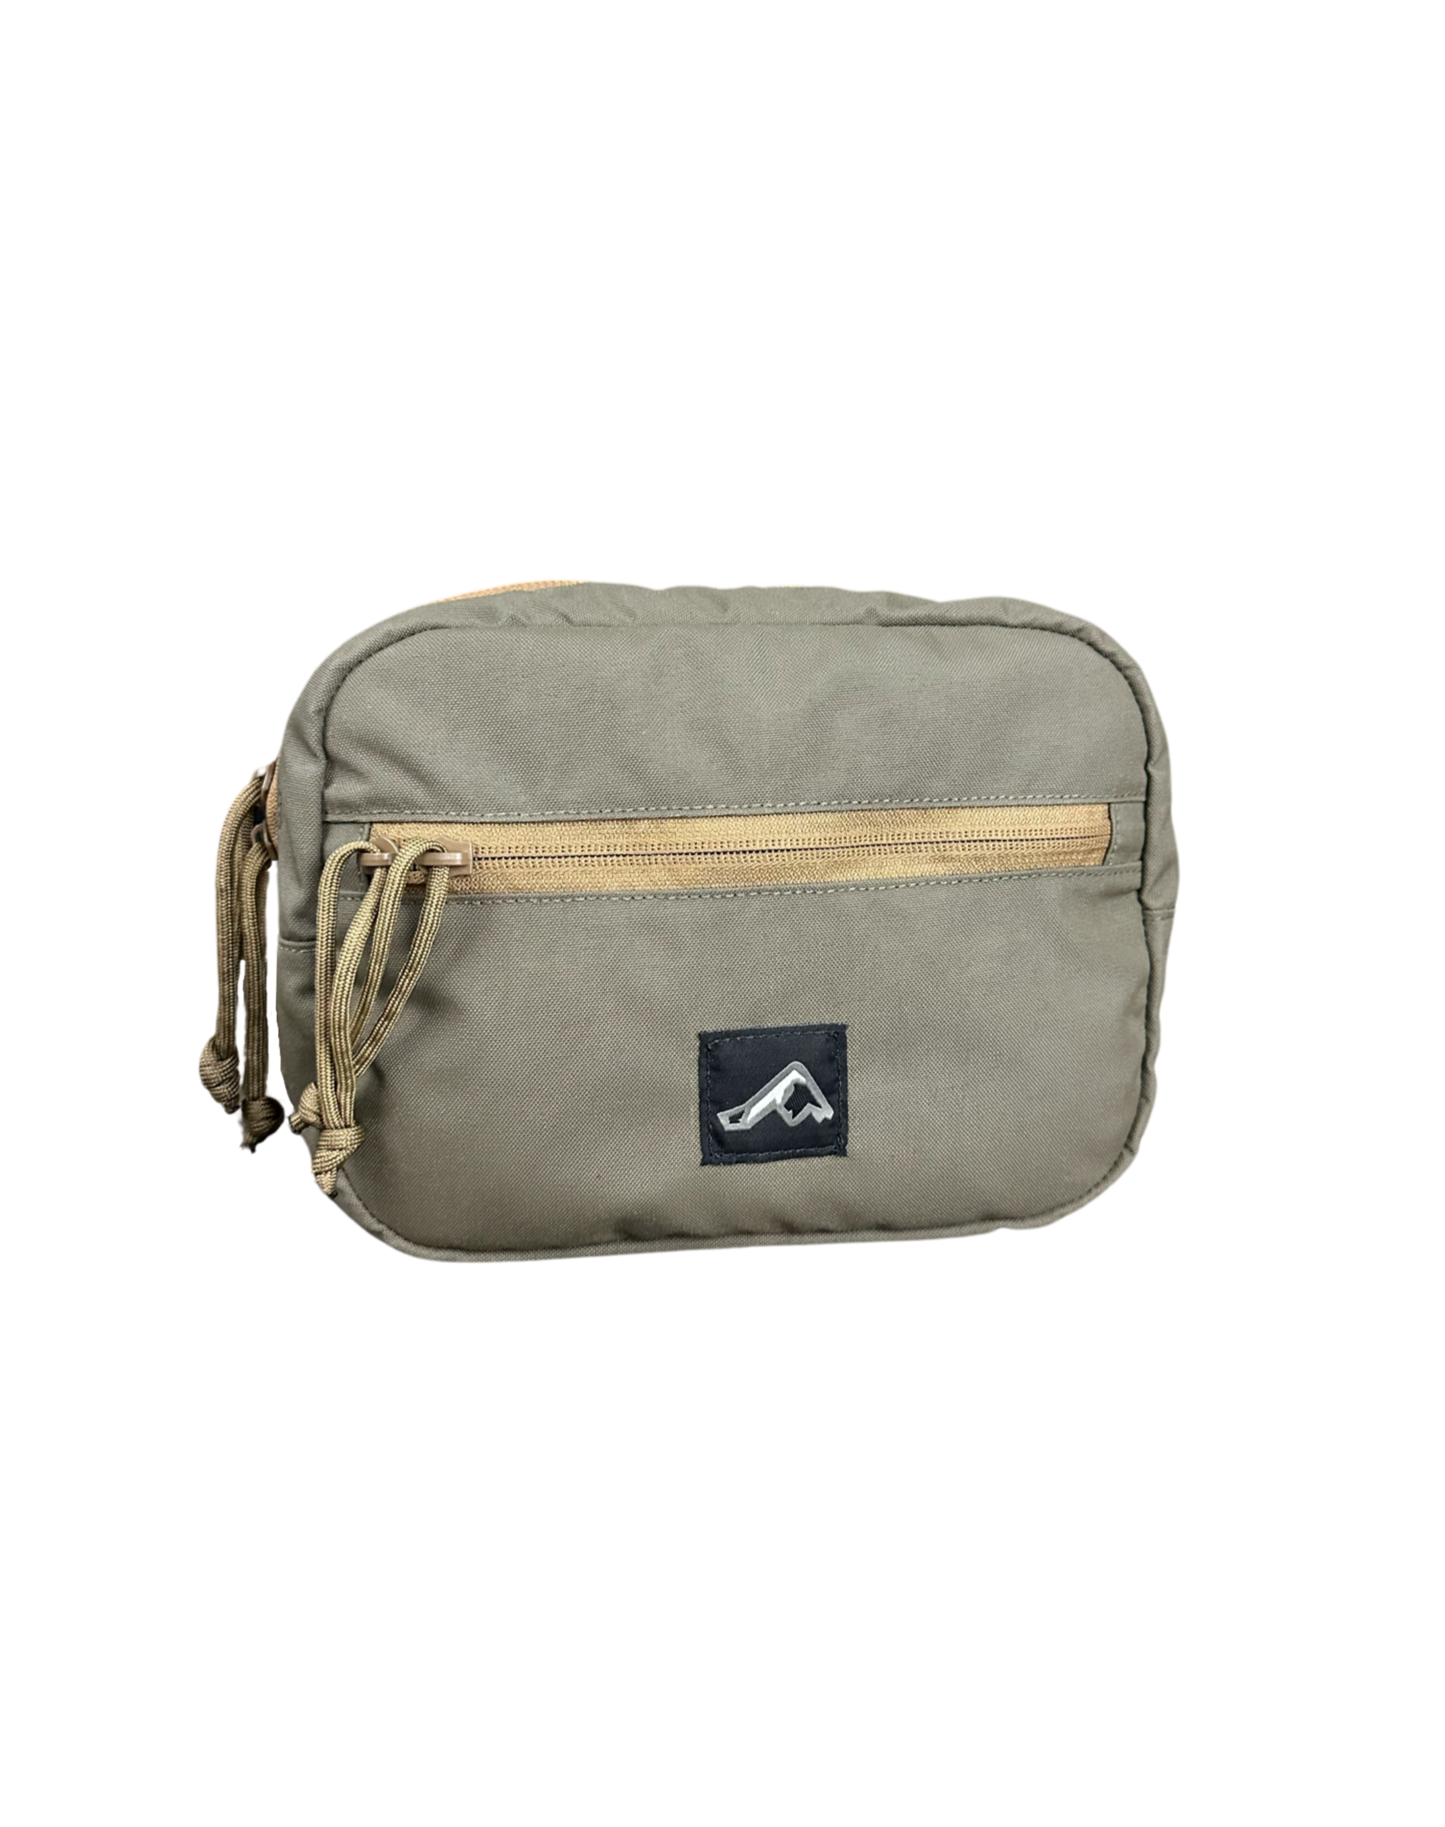 Ruckmule xl Pacer pouch front panel view MOLLE general purpose pouch modular pouch Ranger green